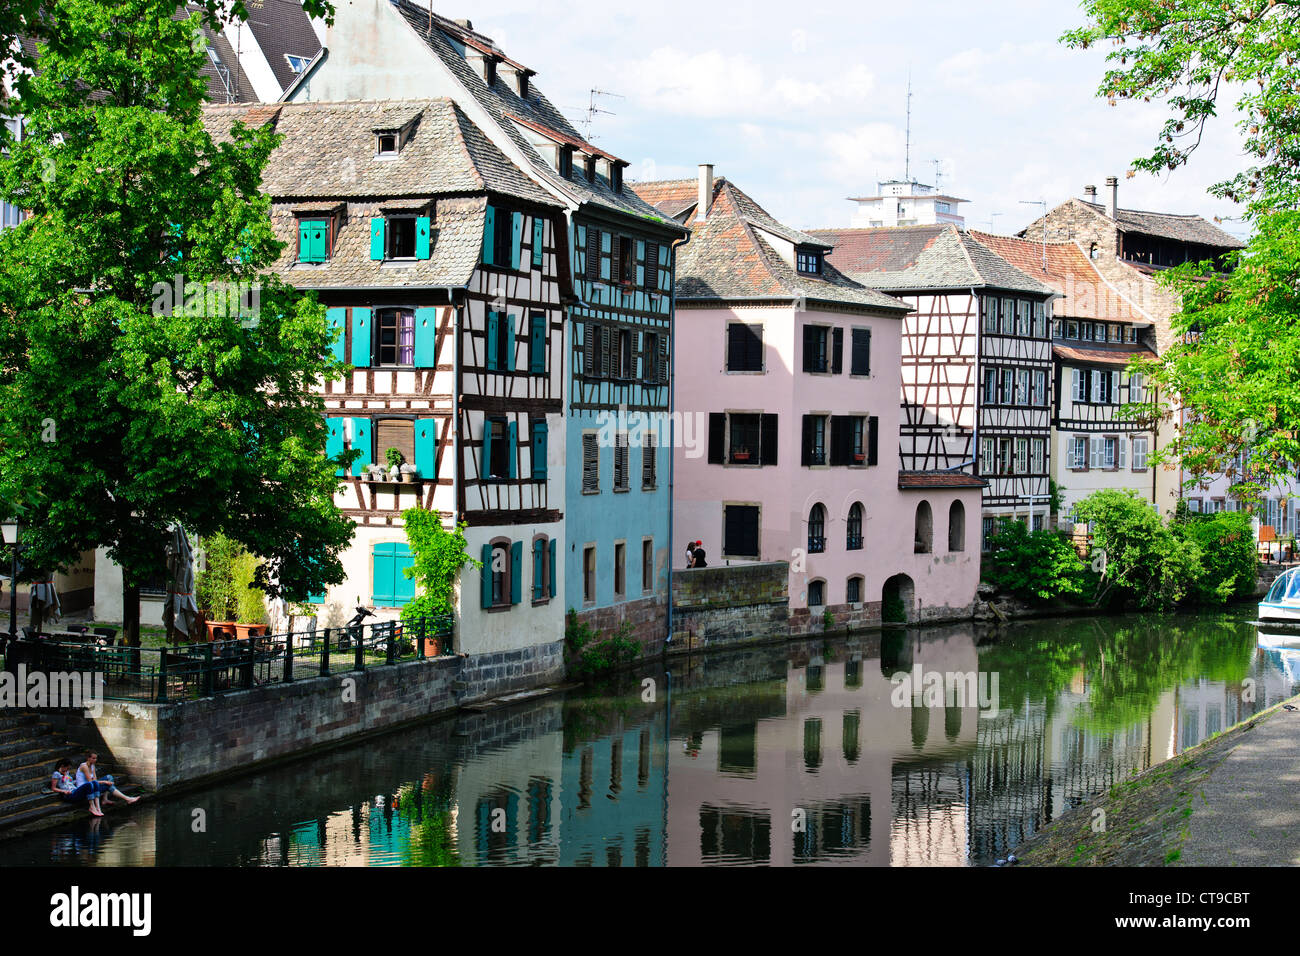 Many timbered and half-timbered houses in the area,some dating from medieval times,L'ILL River,Petit France,Strasbourg,France Stock Photo